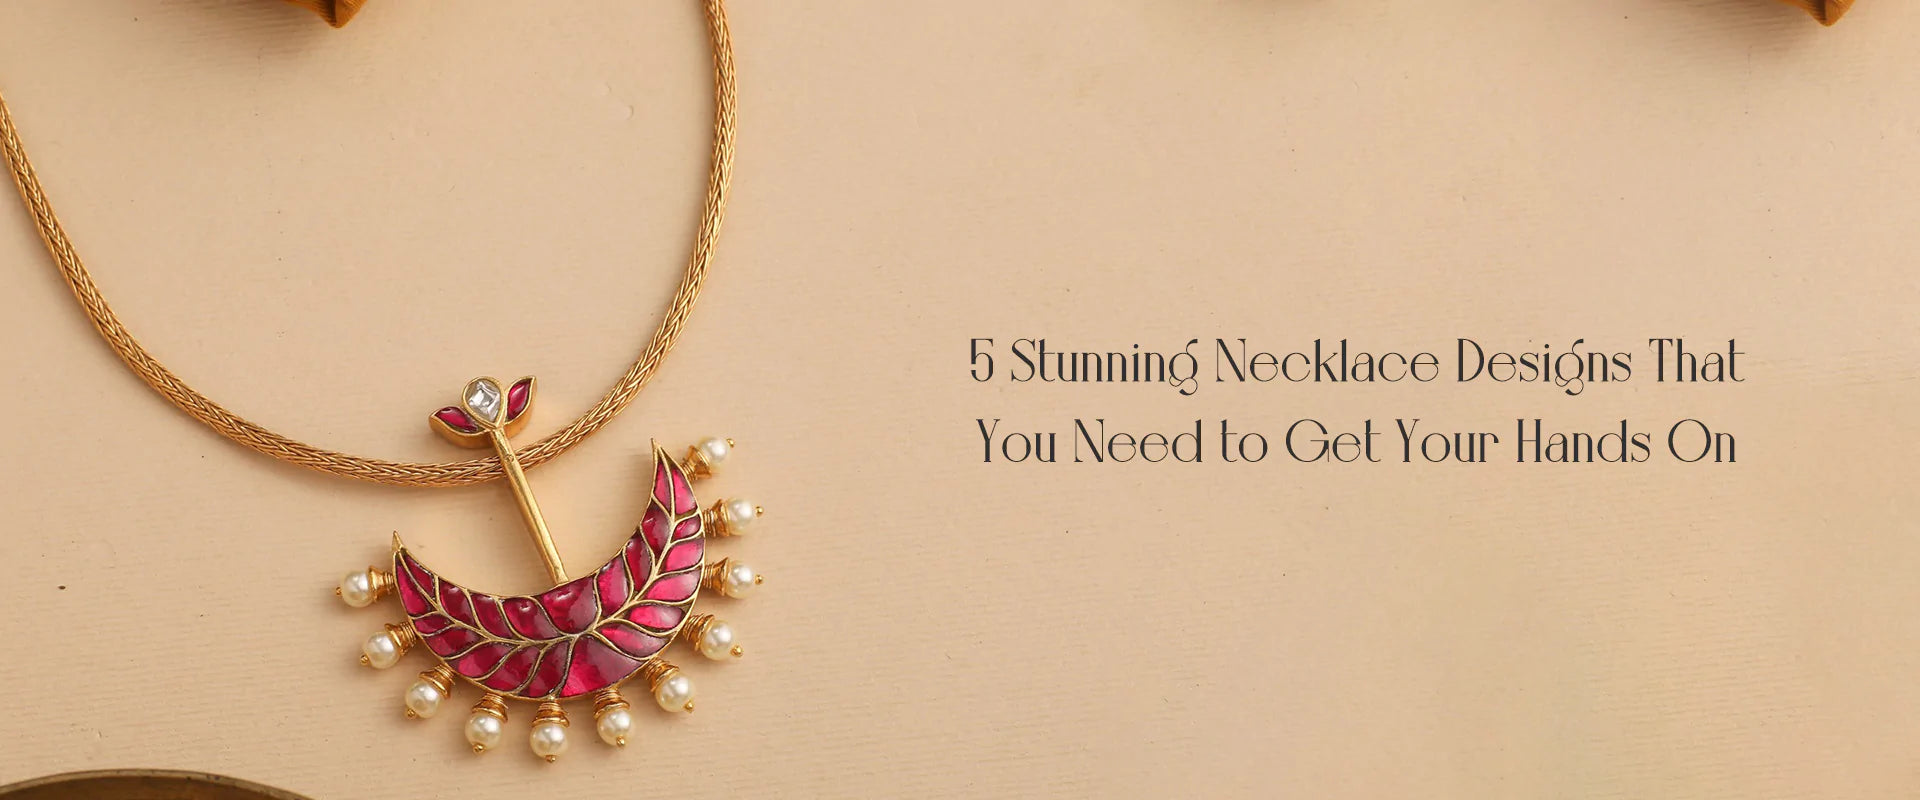 5 Stunning Necklace Designs That You Need to Get Your Hands On